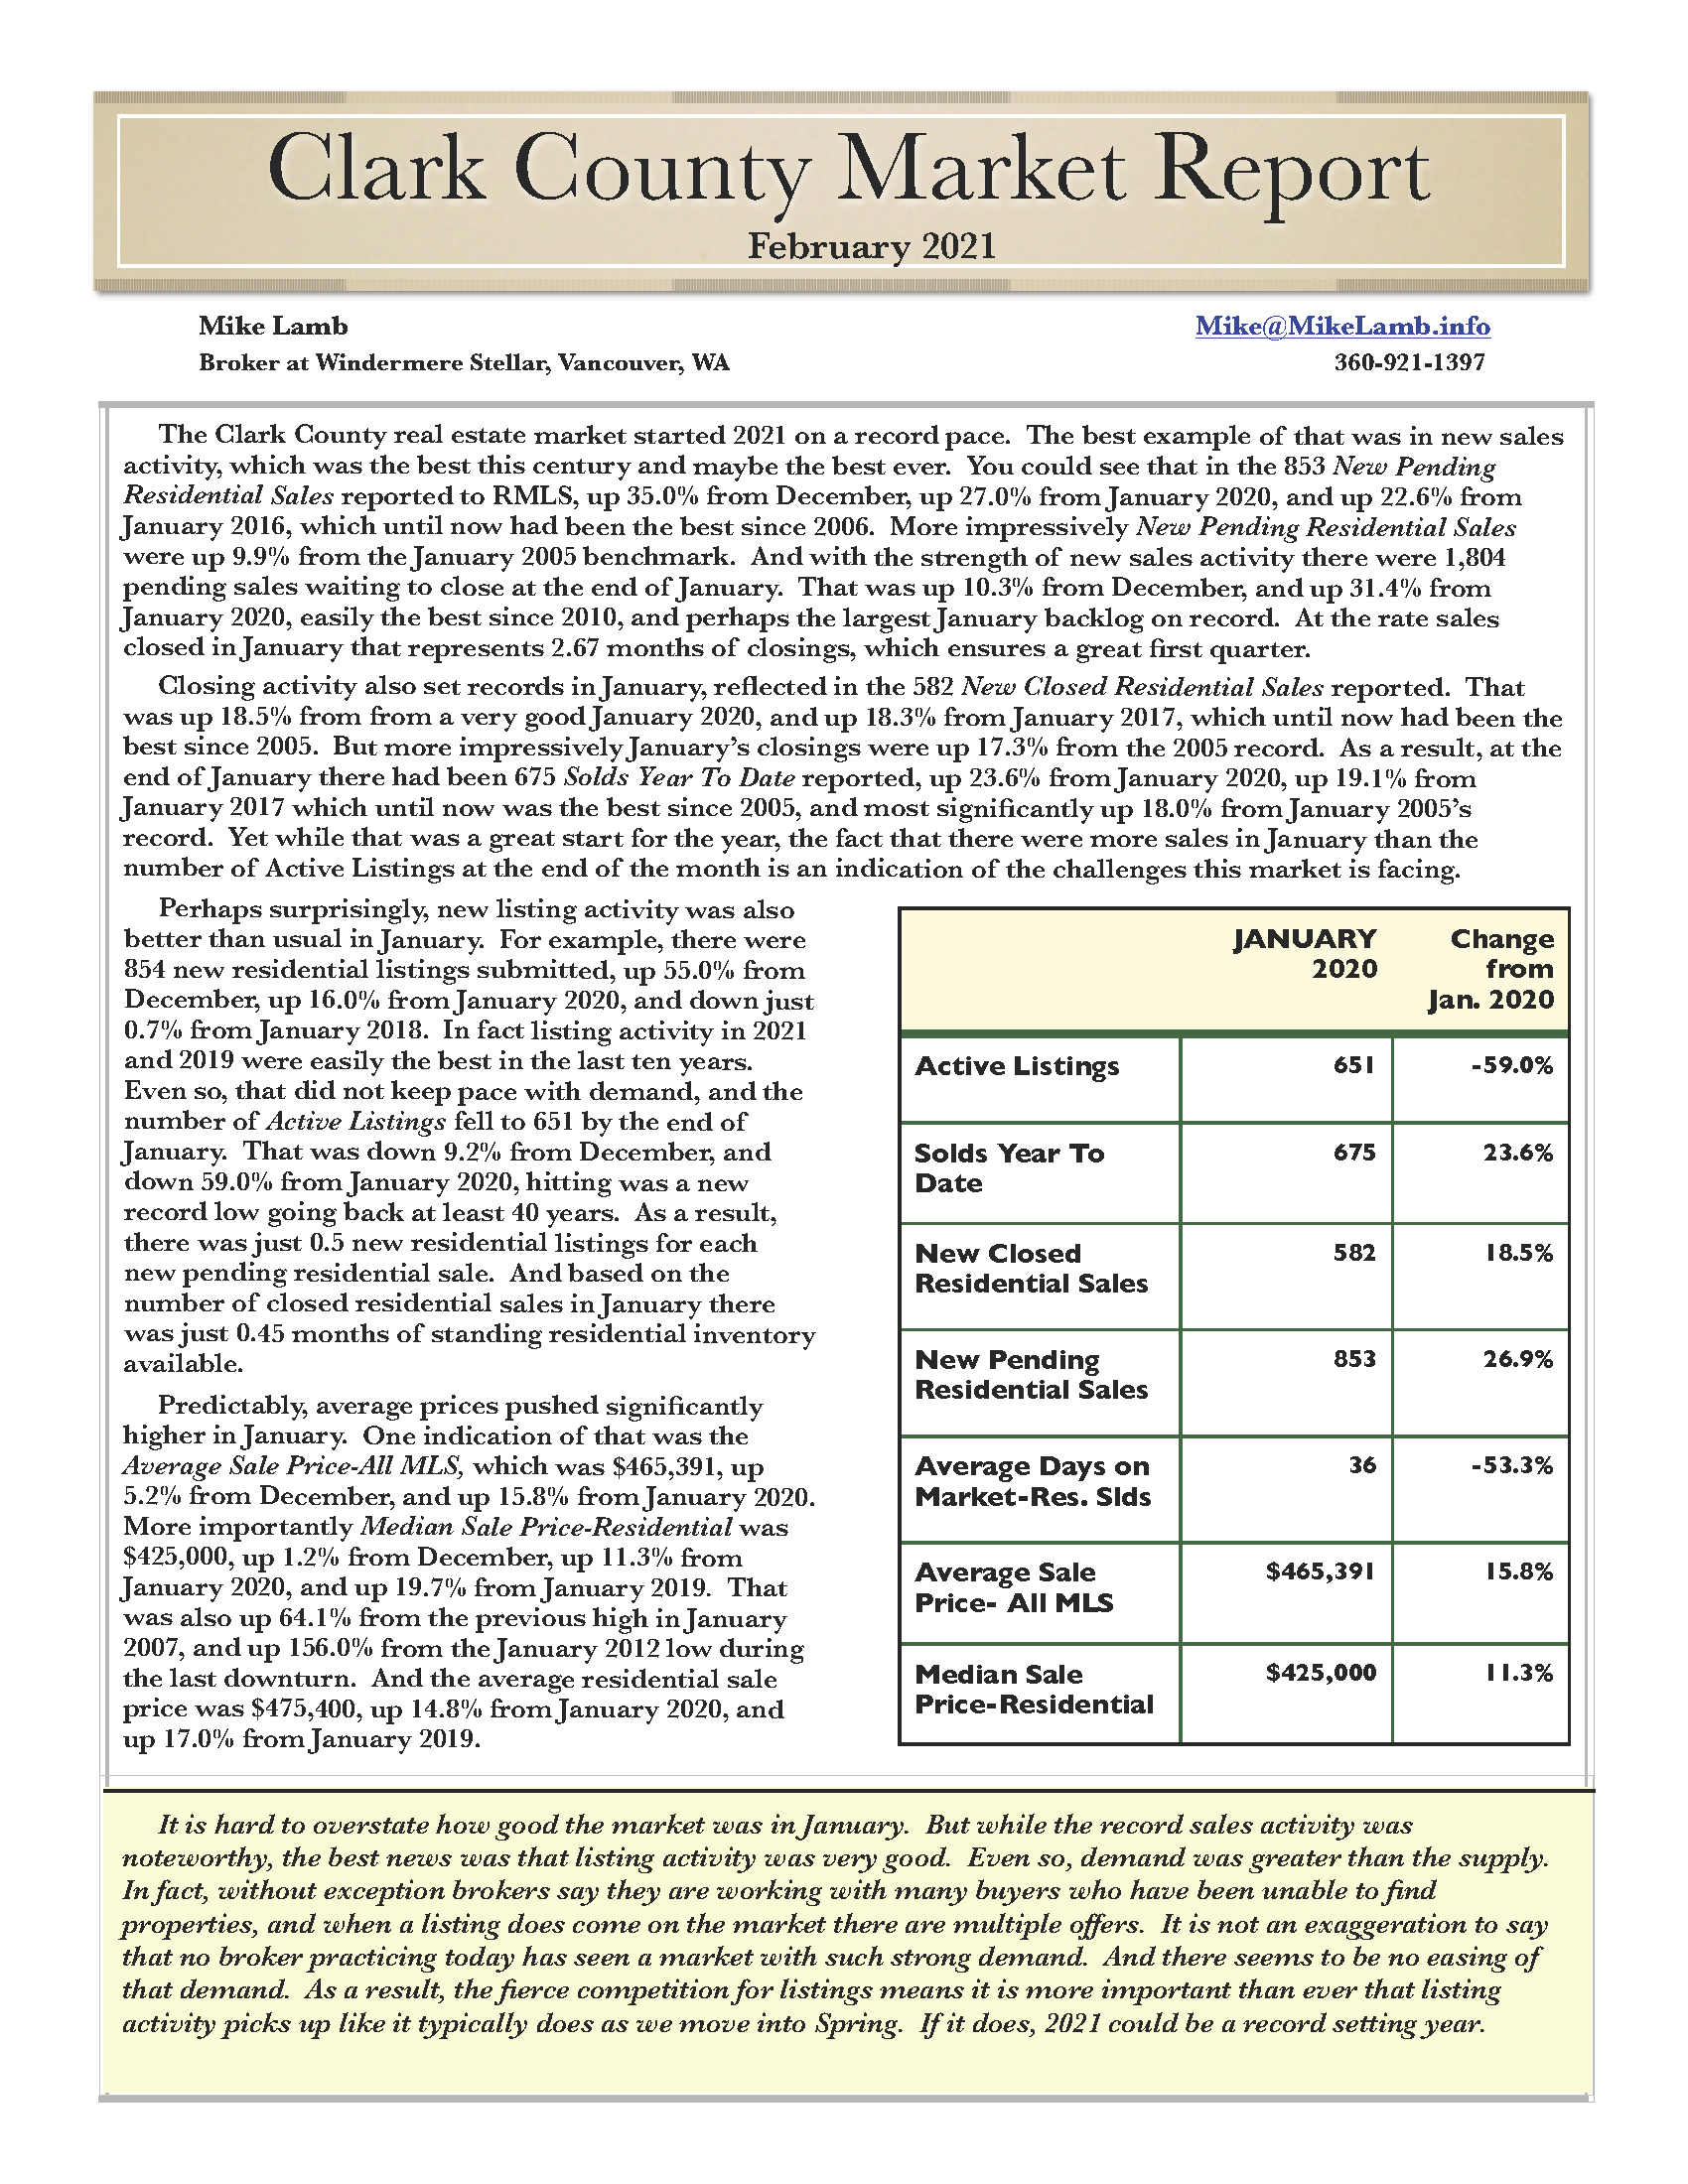 February 2021 Clark County Market Report by Mike Lamb